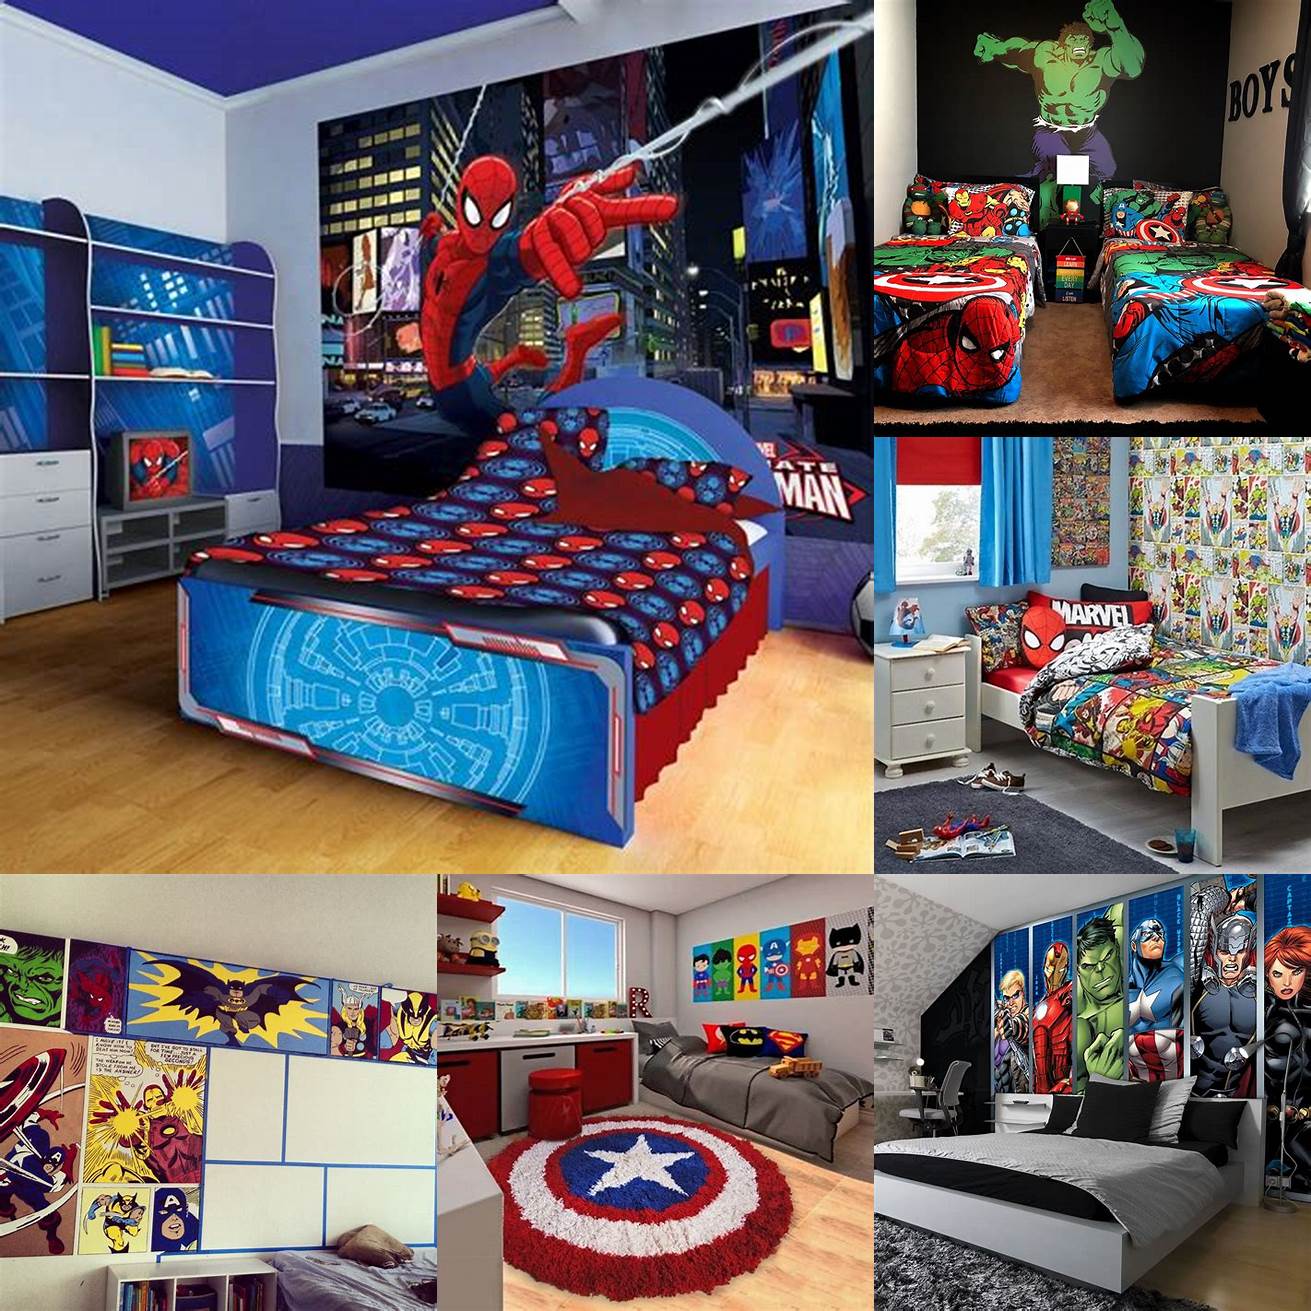 A superhero-themed bedroom is perfect for kids who love comic books and superheroes You can use superhero posters and bedding as decor